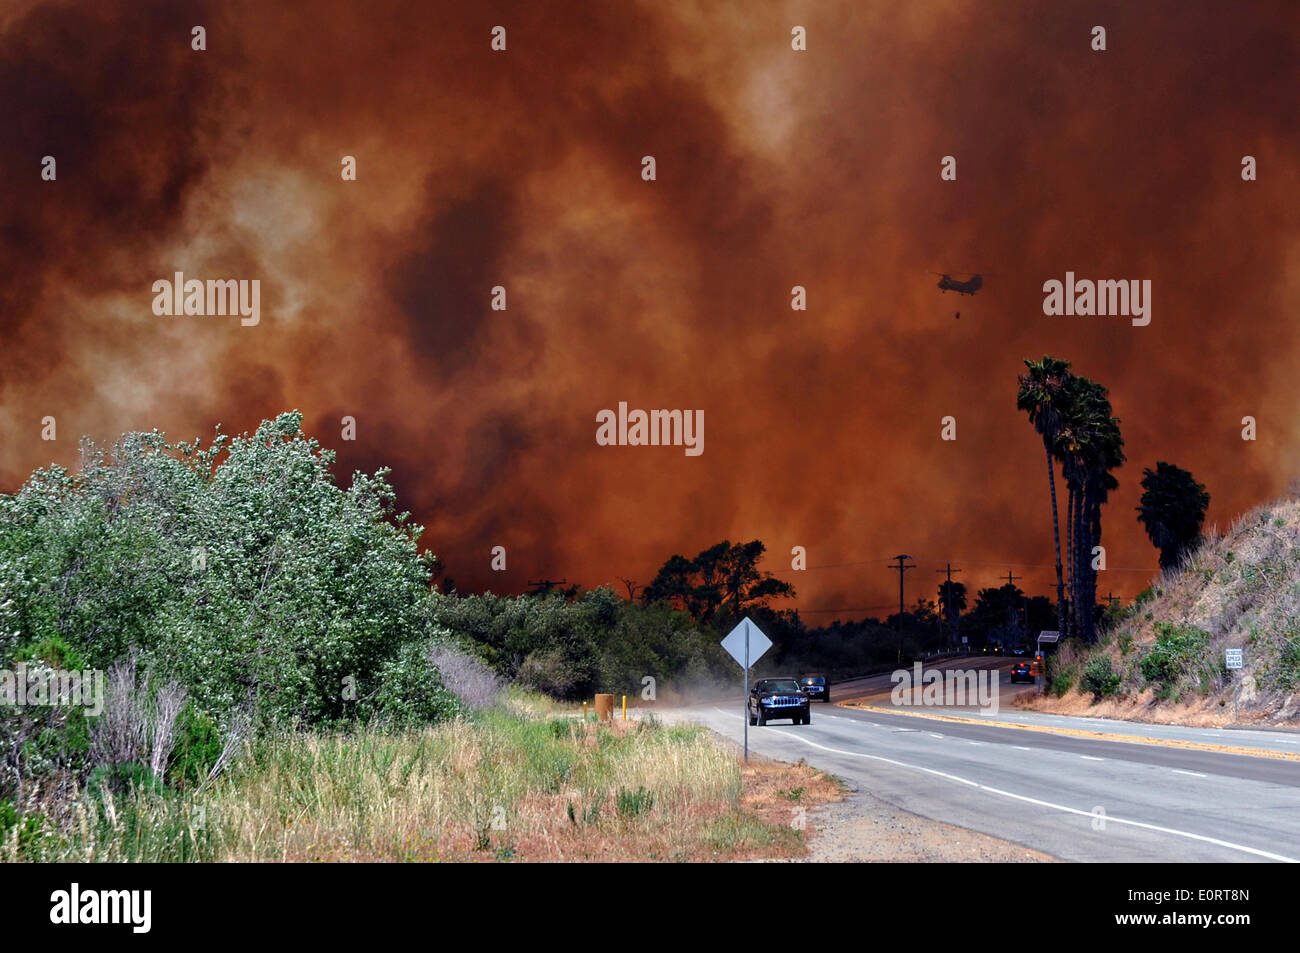 The Las Pulgas wildfire burns along a roadway in the foothills around the Marine Corps Air Station May 16, 2014 in Camp Pendleton, California.  The Las Pulgas Wildfire on Camp Pendleton has burned more than 15,000 acres and is the largest fire in San Diego County history. Stock Photo